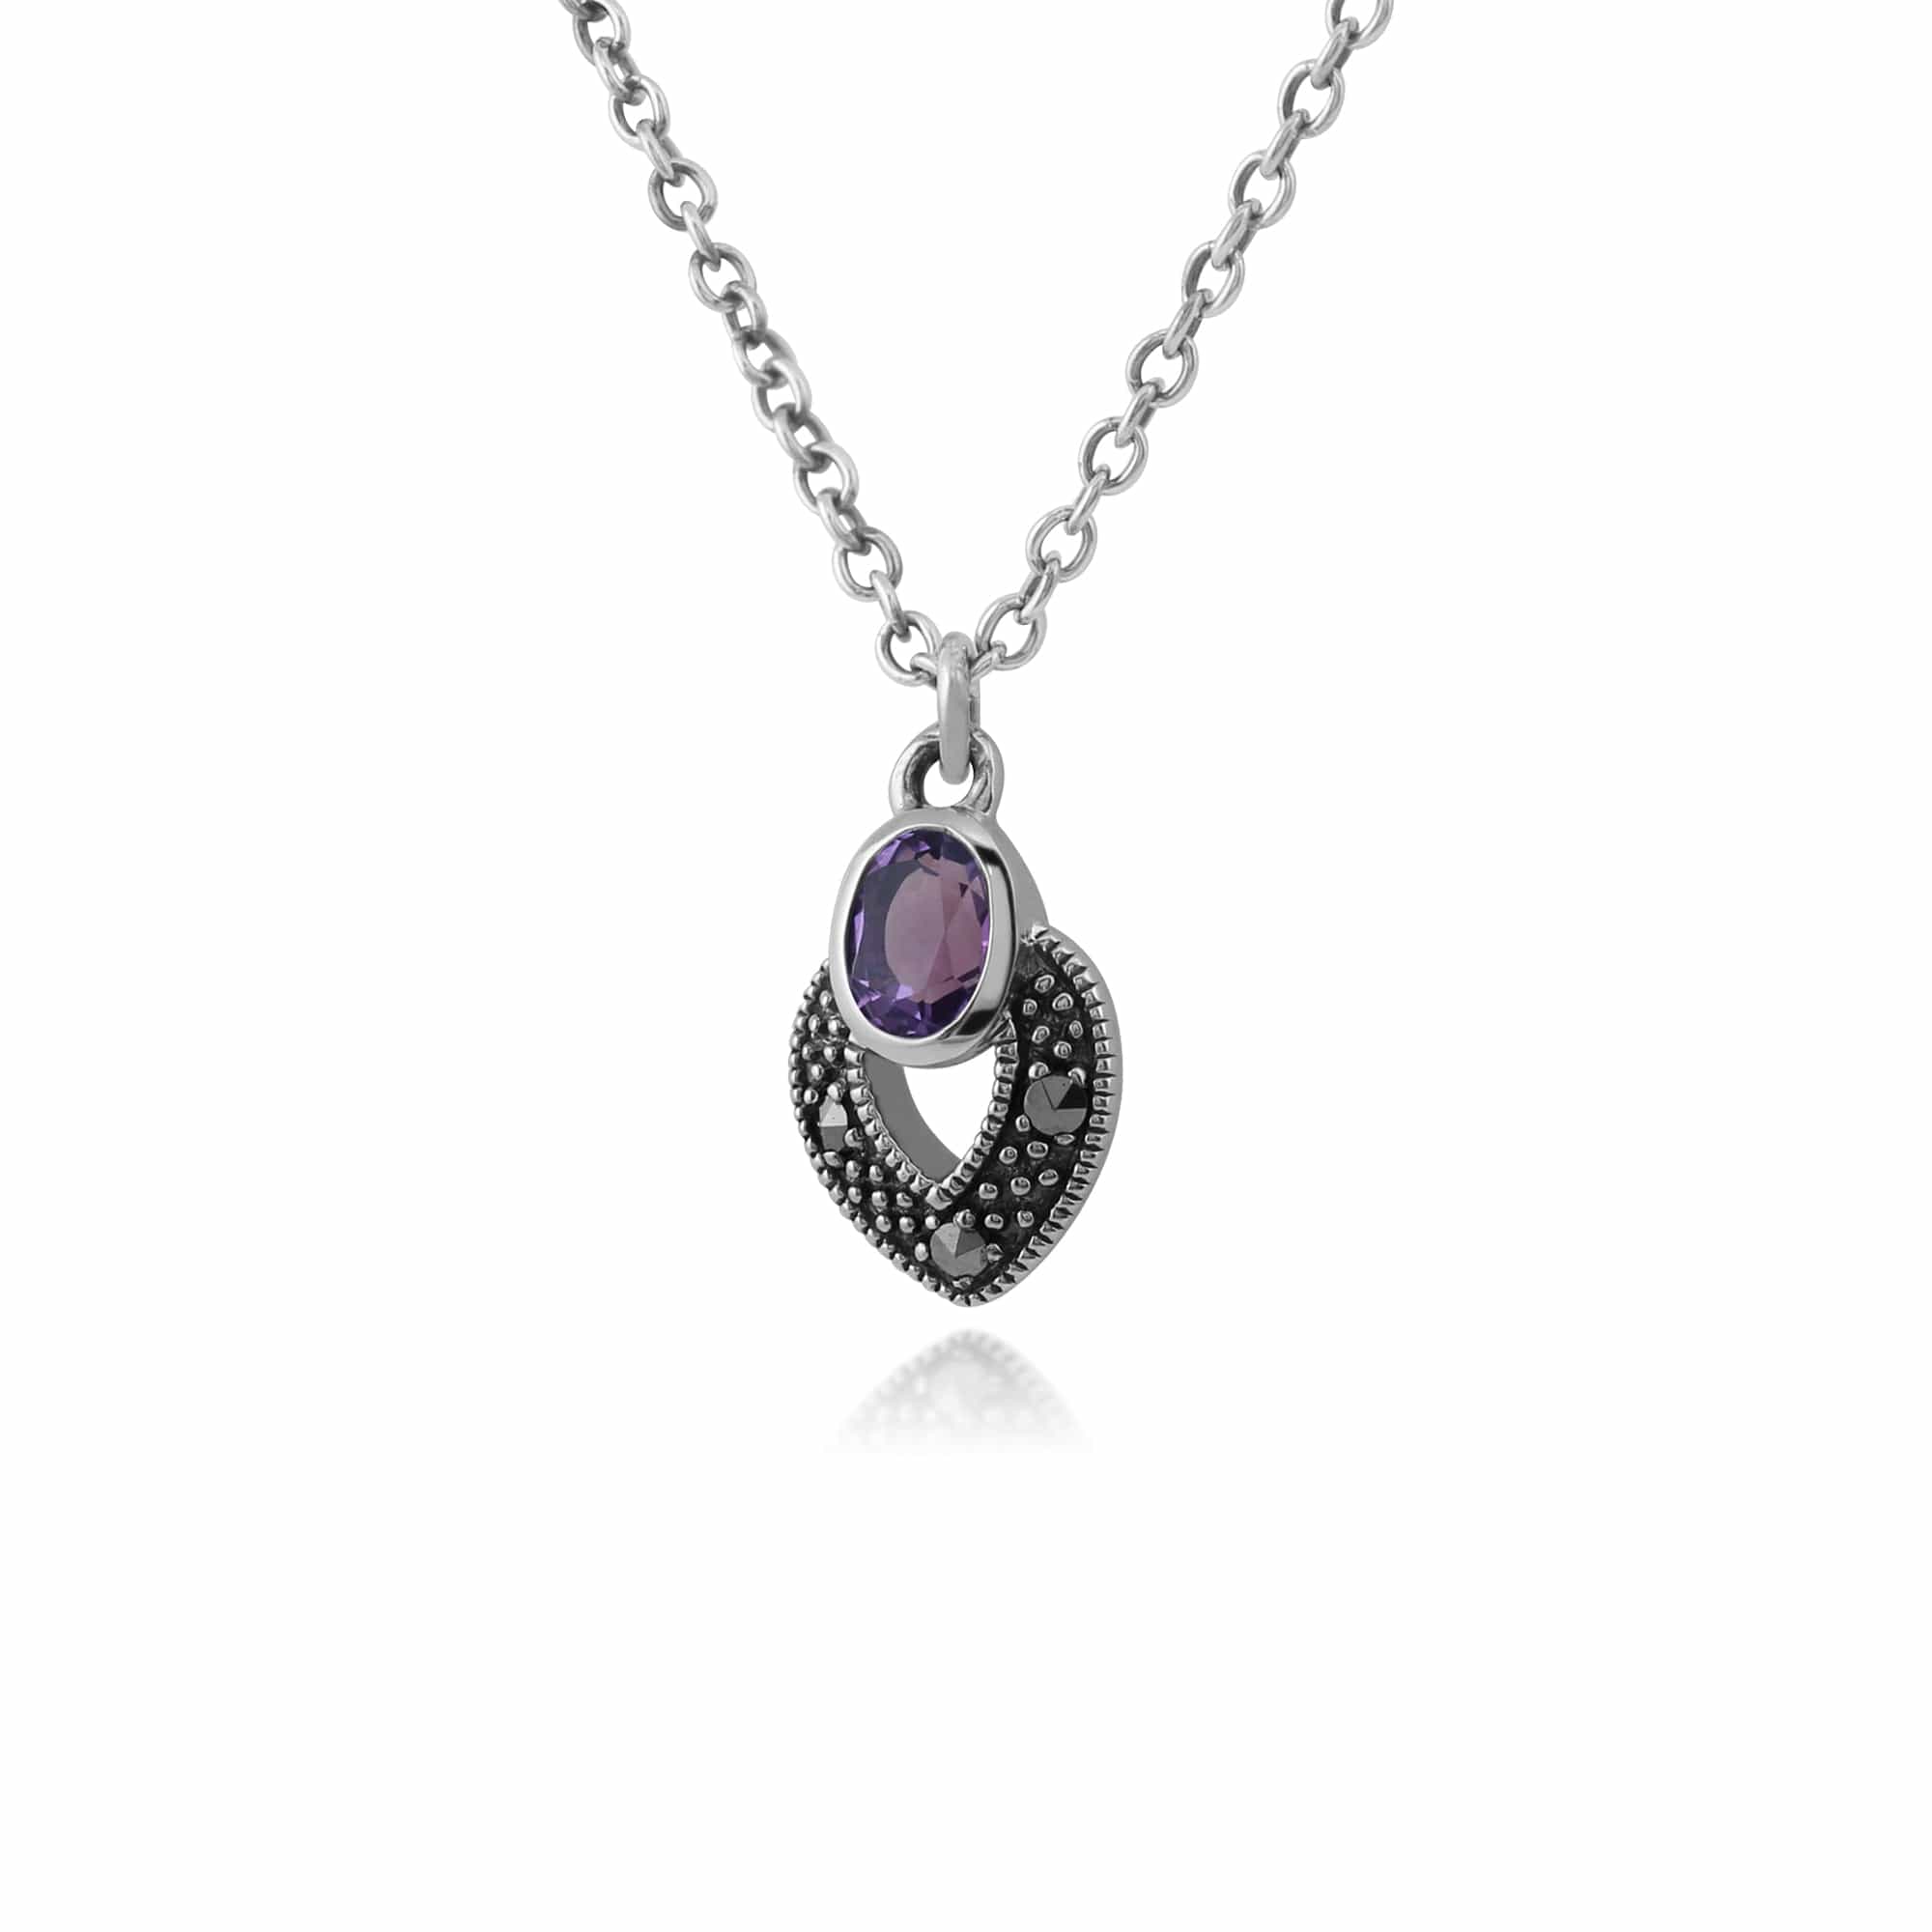 Art Deco Style Oval Amethyst & Marcasite Necklace in 925 Sterling Silver - Gemondo